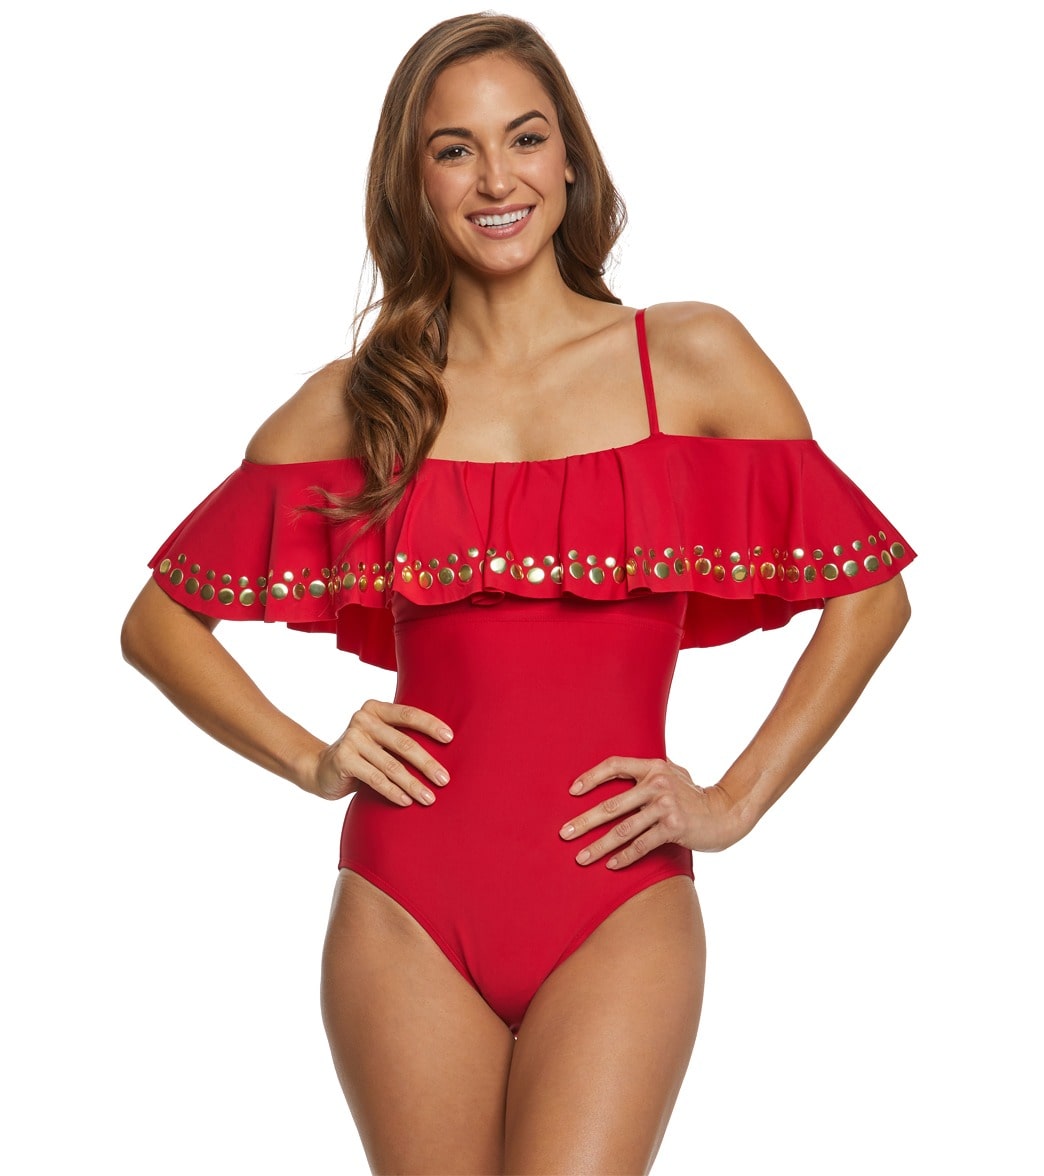 Athena Hey There Stud Cold Shoulder One Piece Swimsuit - Red 6 Elastane/Polyamide - Swimoutlet.com